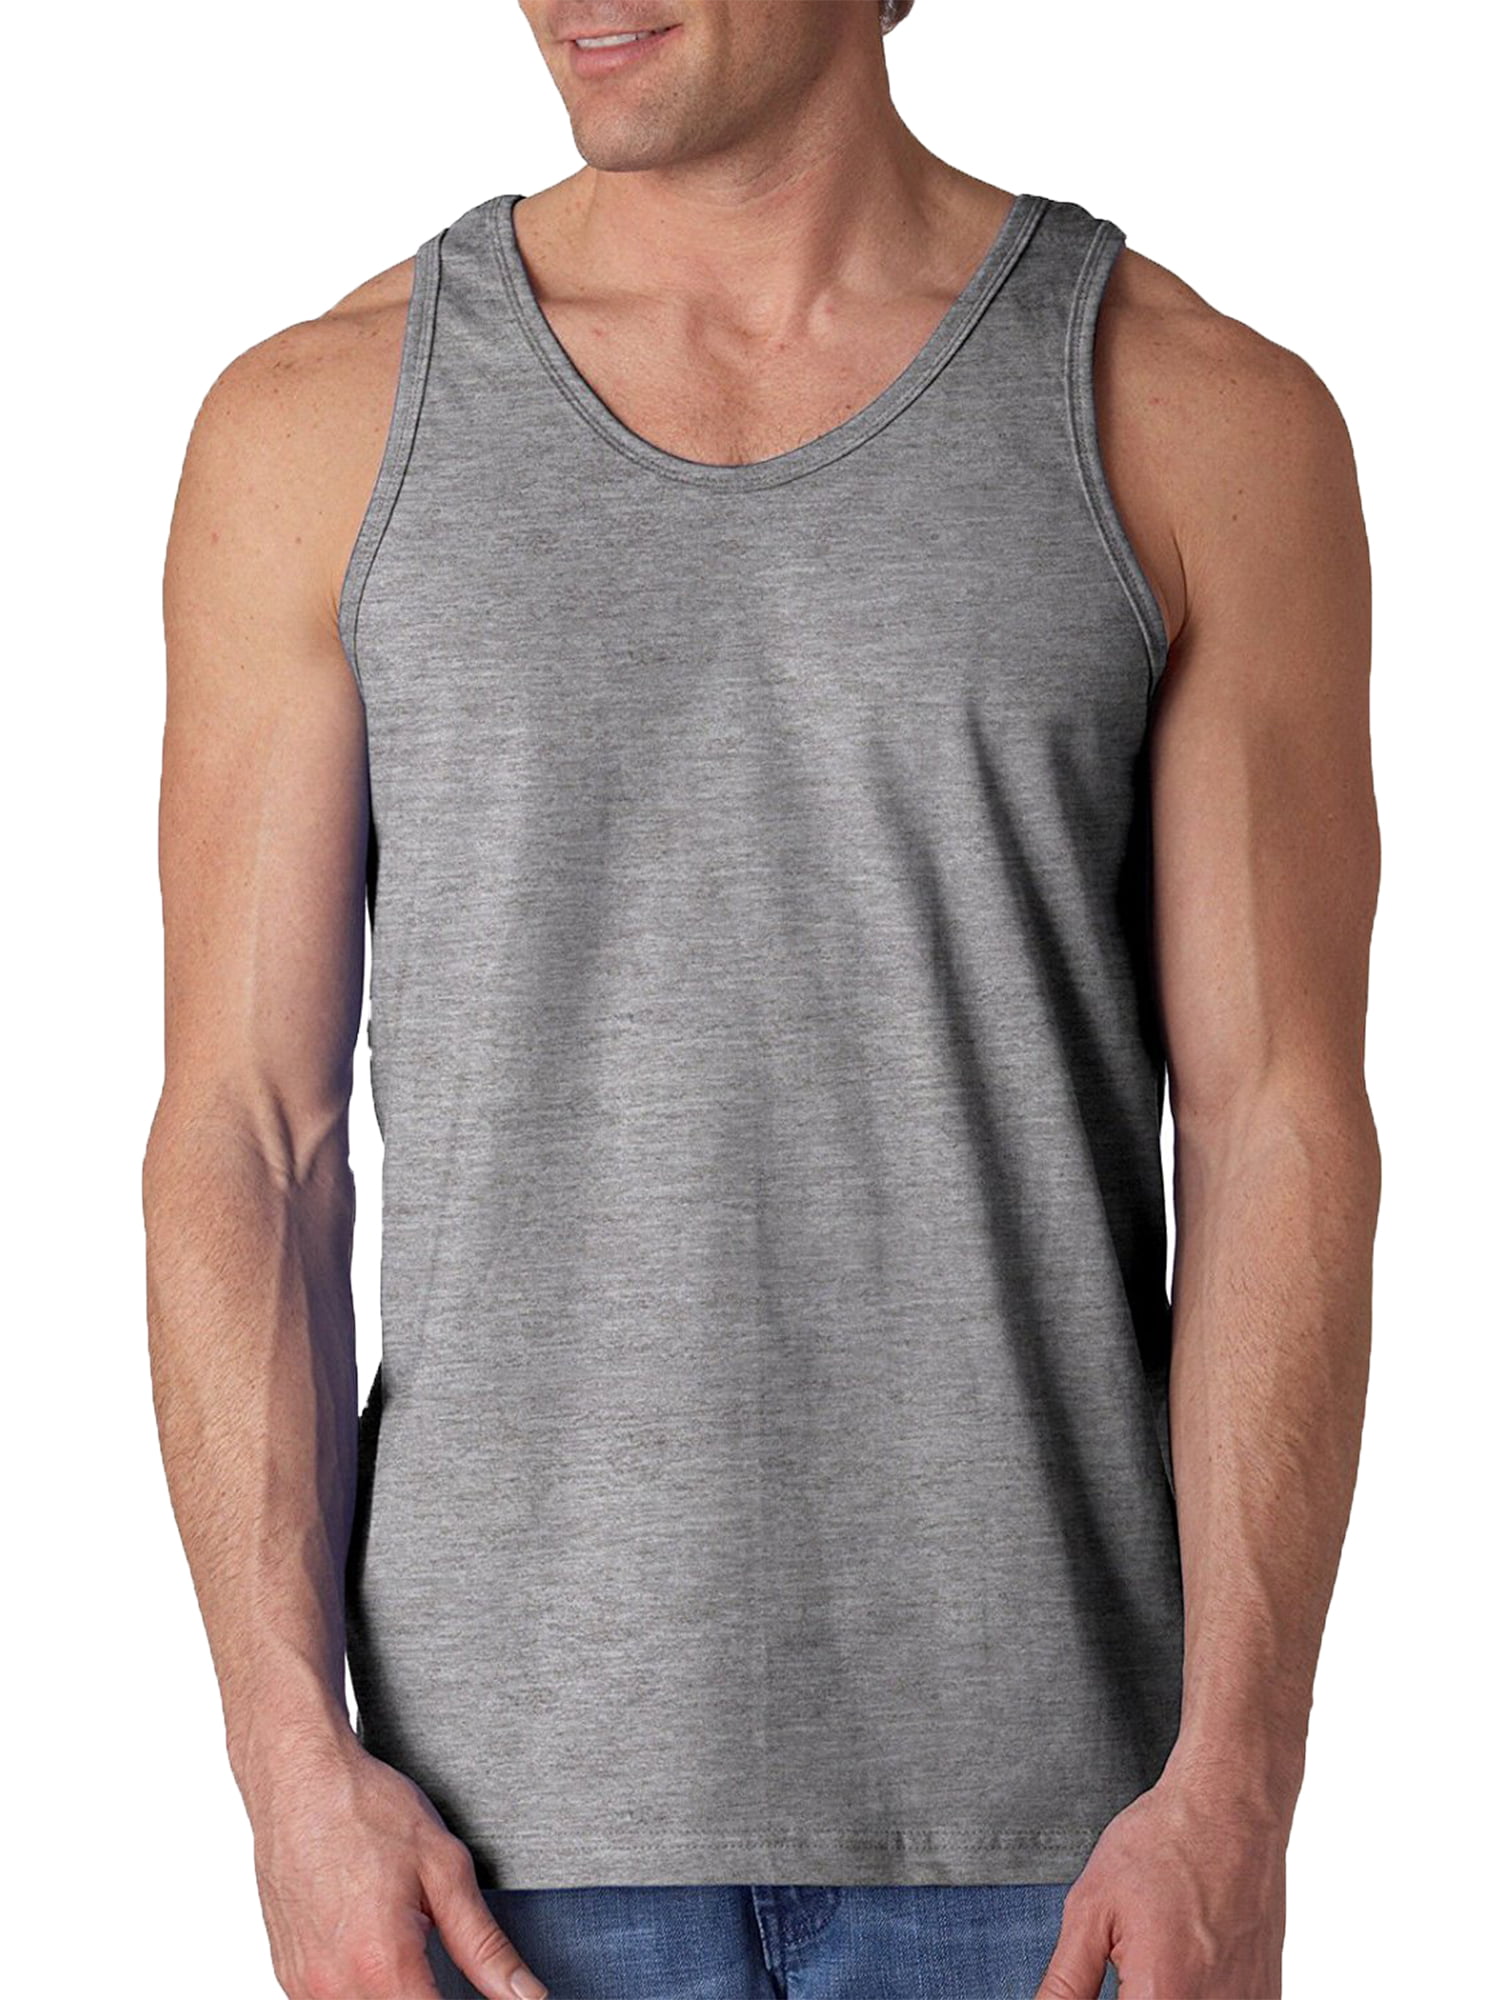 Casual Basic Men's 100% Pre-Shrunk Cotton Workout Muscle Tank Tops Tee -  Pool, 3XL 